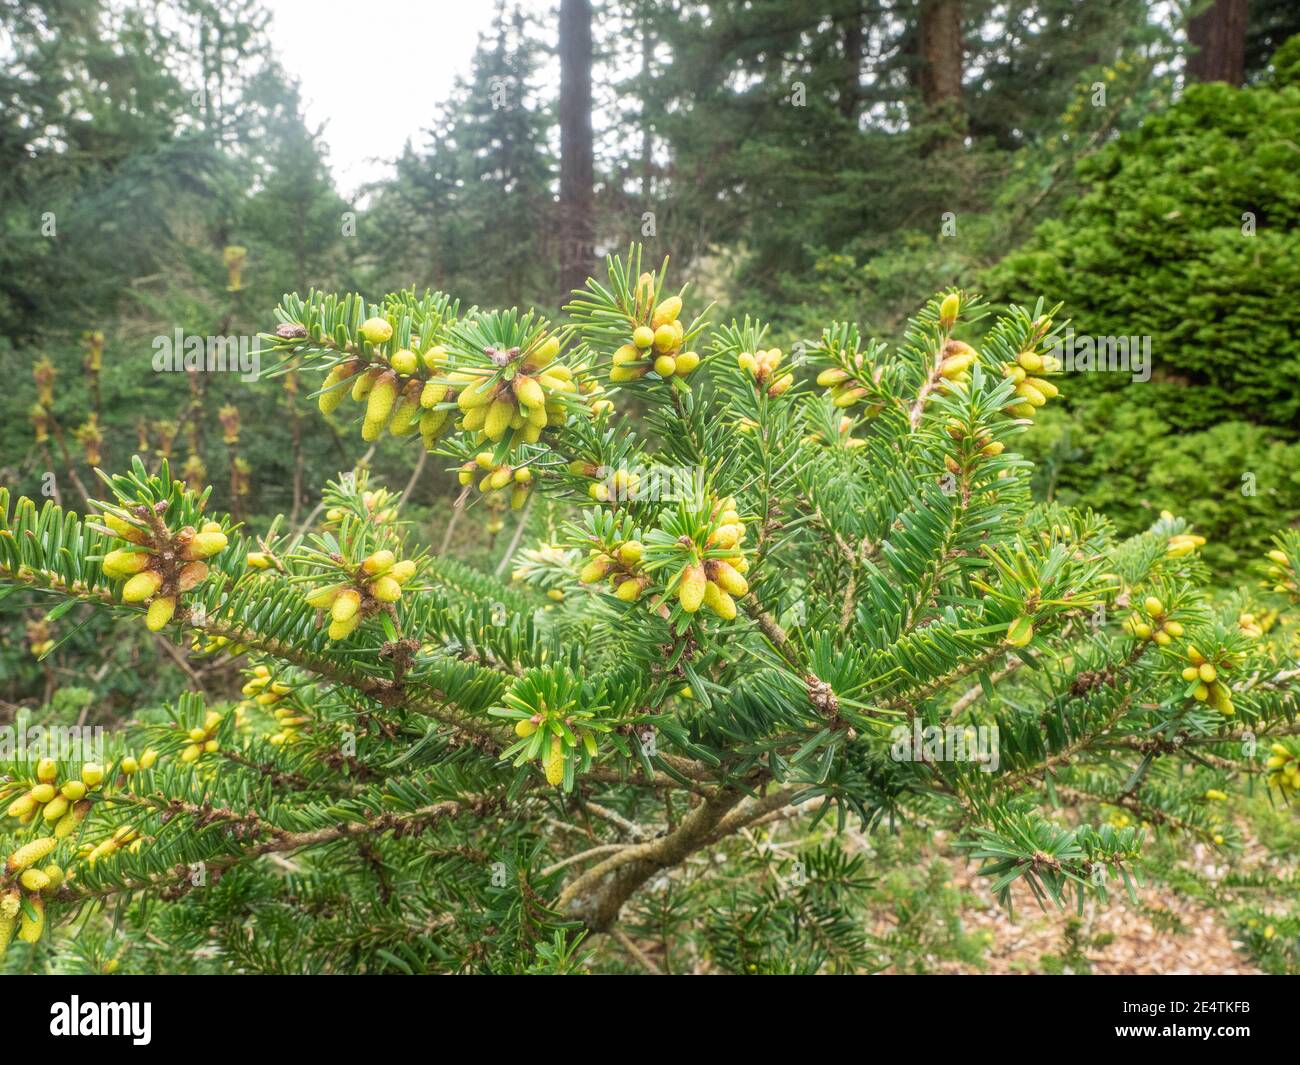 Eastern white pine (Pinus strobus) is a large pine native to eastern North America. Stock Photo